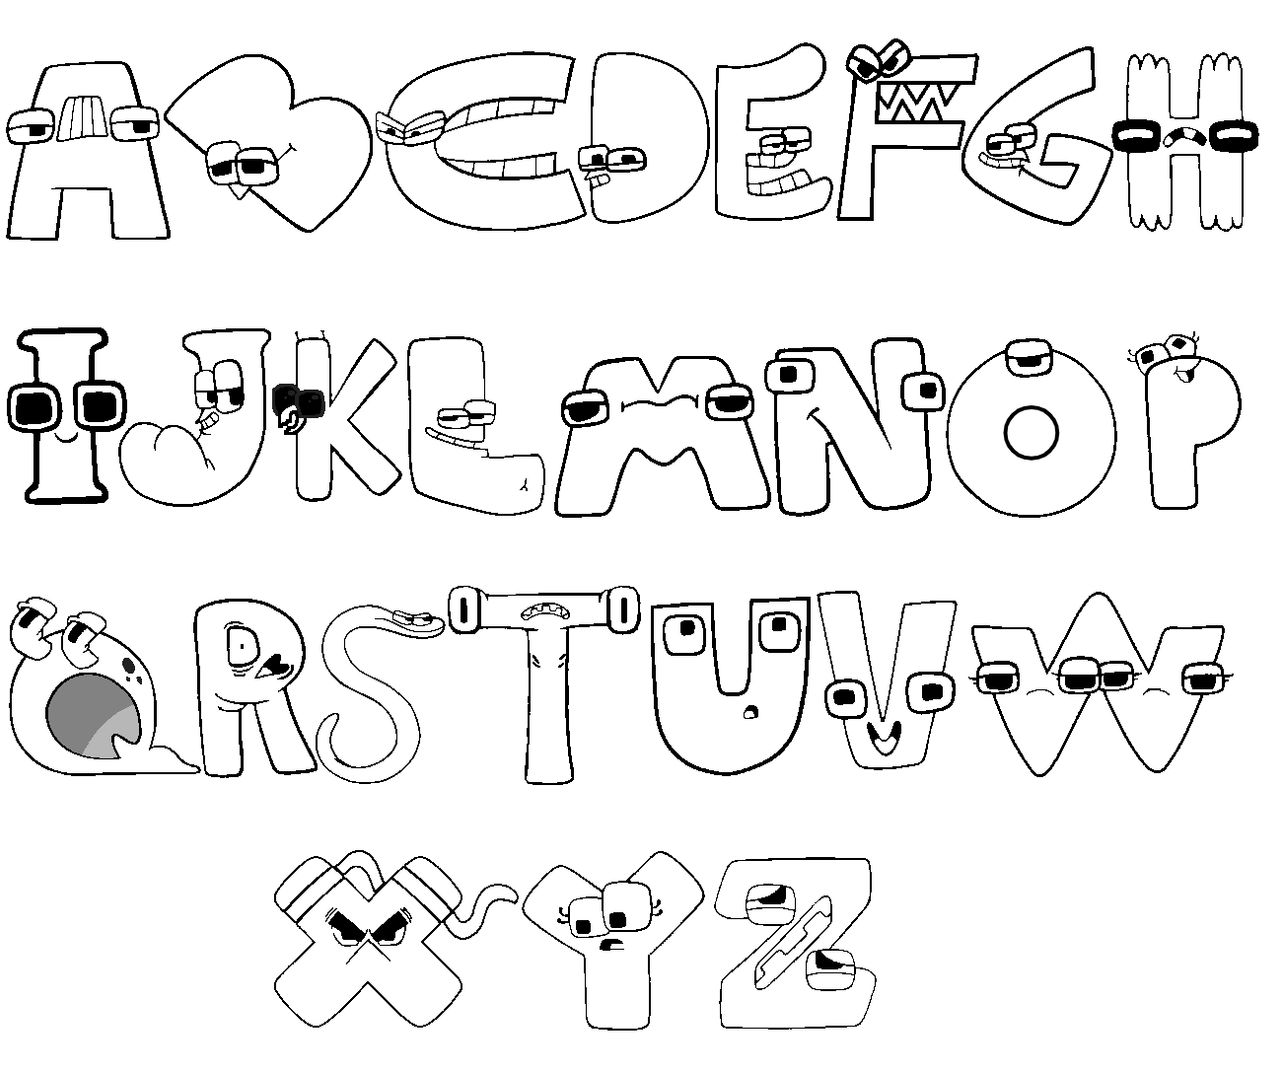 S Alphabet Lore Coloring Page for Kids - Free Alphabet Lore